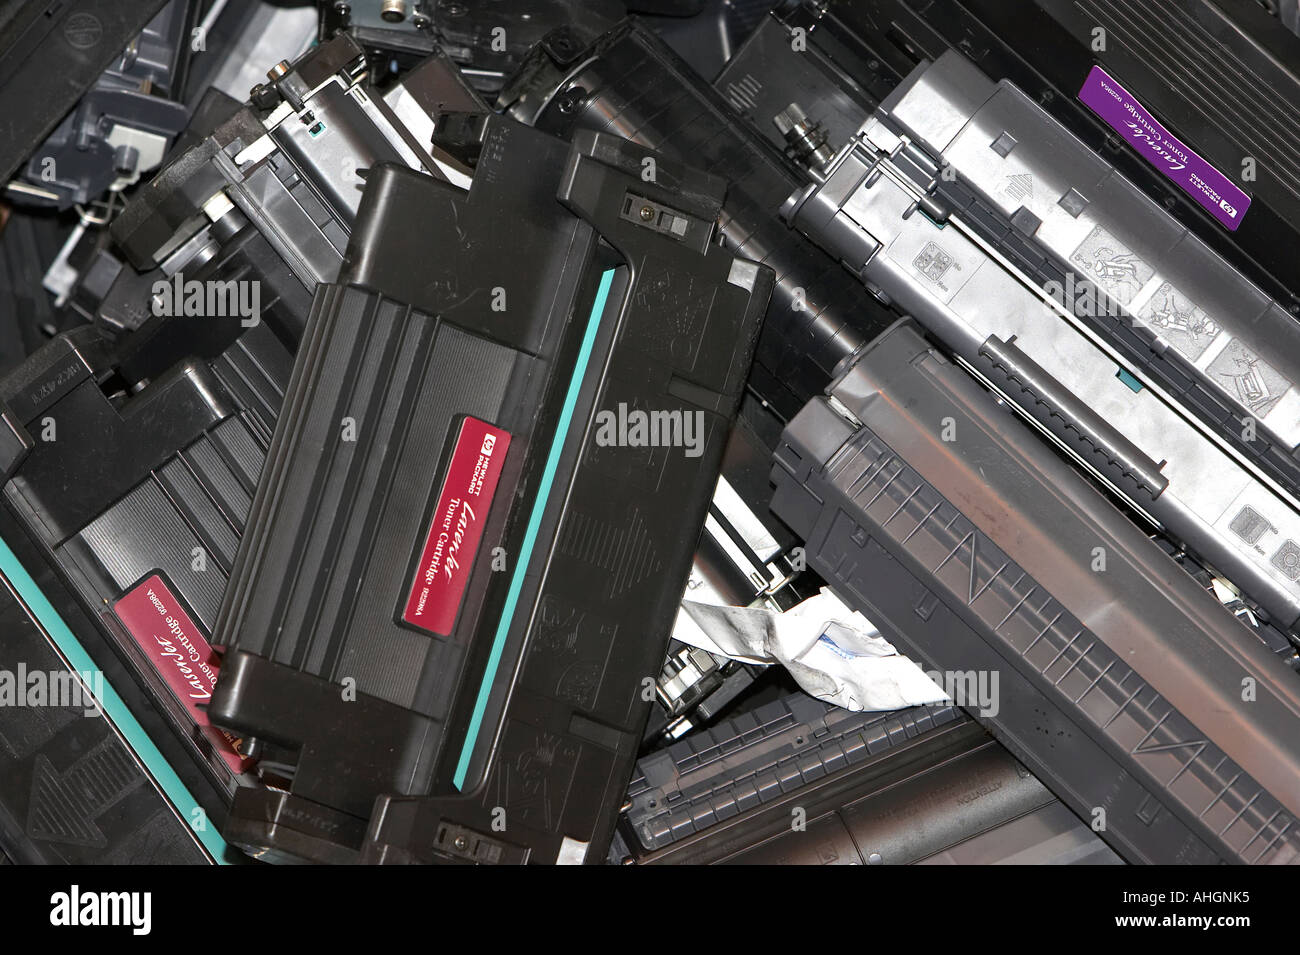 piles of computer laser printer toner cartridges ready for recycling Stock  Photo - Alamy